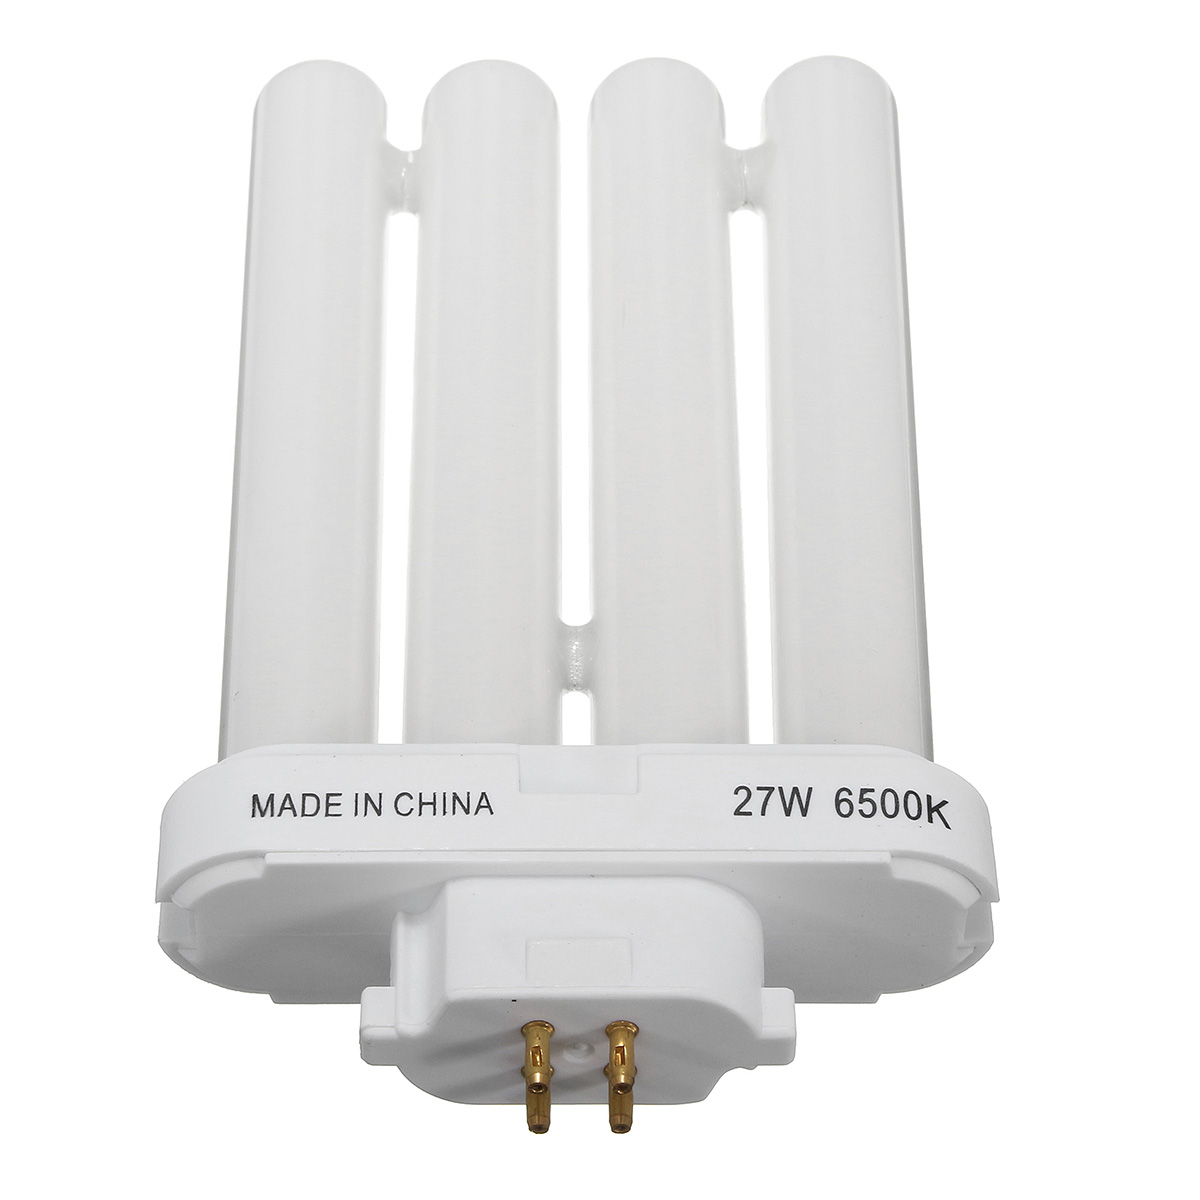 AC220V-27W-Quad-Tube-Compact-Pure-White-Fluorescent-Light-Bulb-for-Indoor-Home-Decoration-1513838